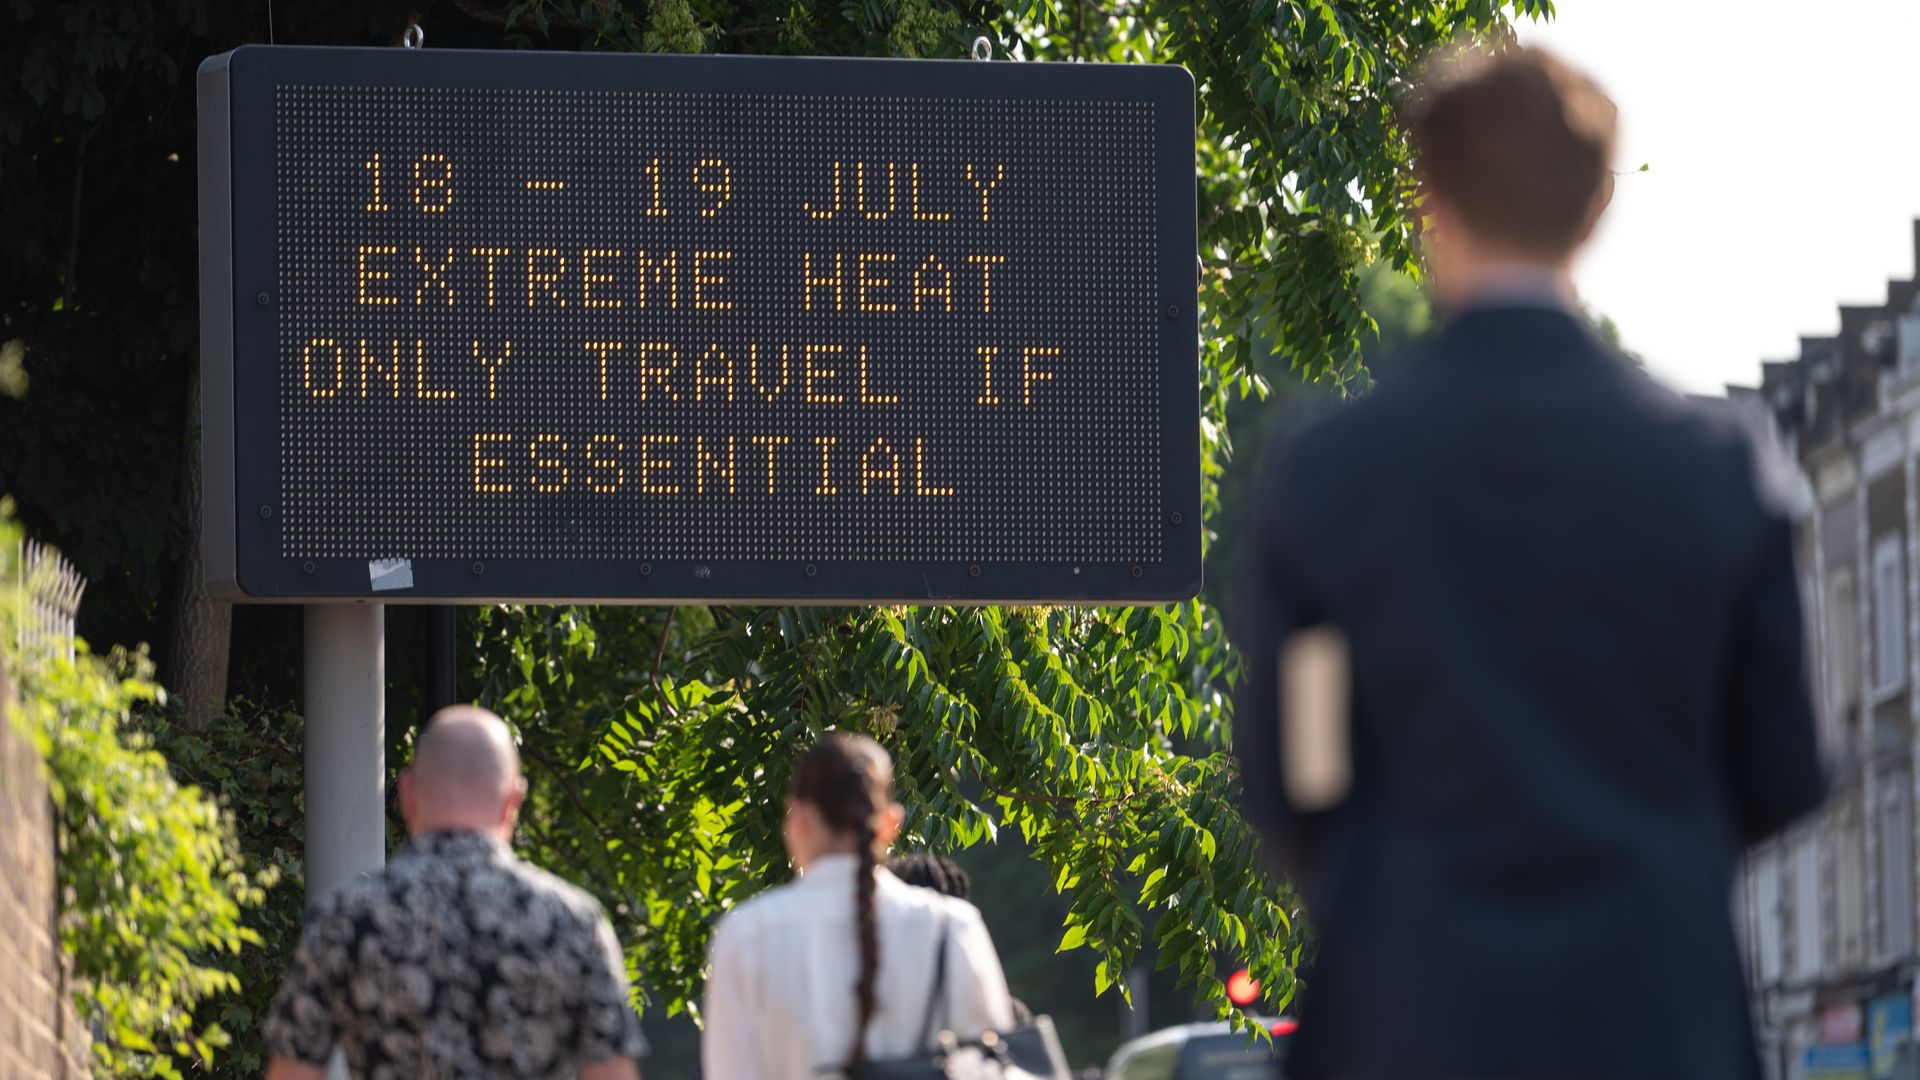 Passersby walk towards an LED sign saying "18 -19 July extreme heat only travel if essential" in the London, England.